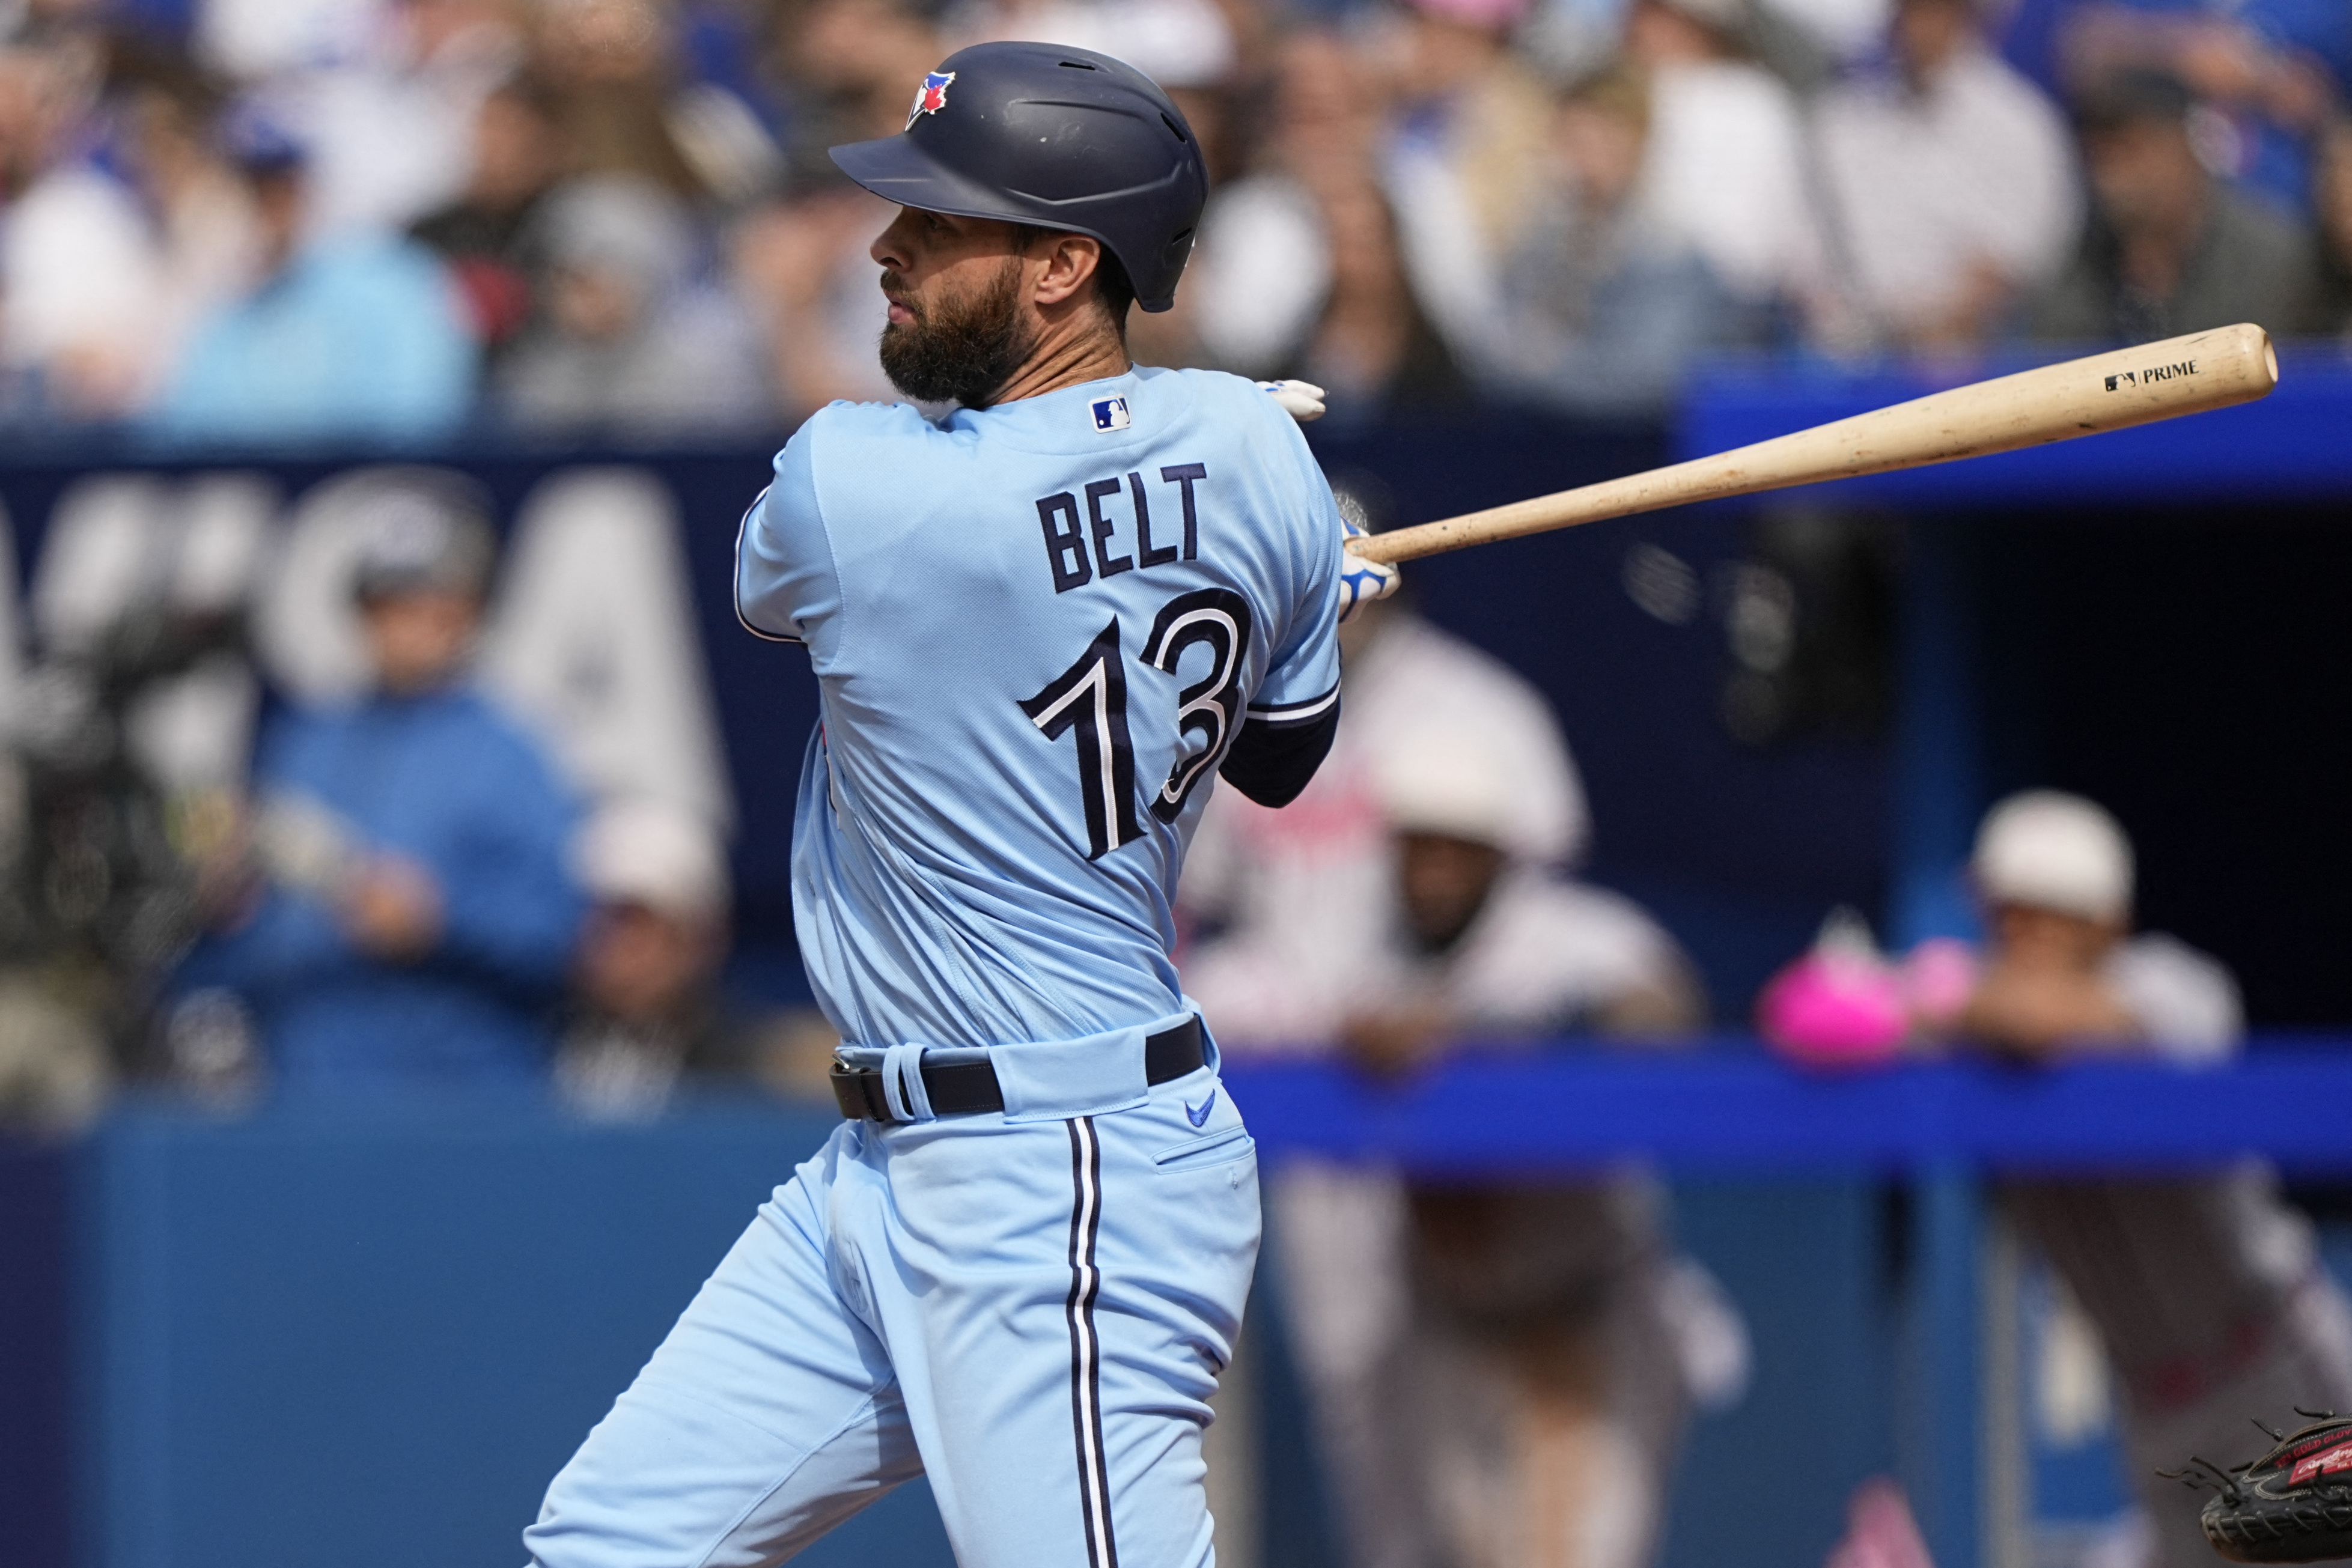 The Toronto Blue Jays defeated the Atlanta Braves in 6 games to